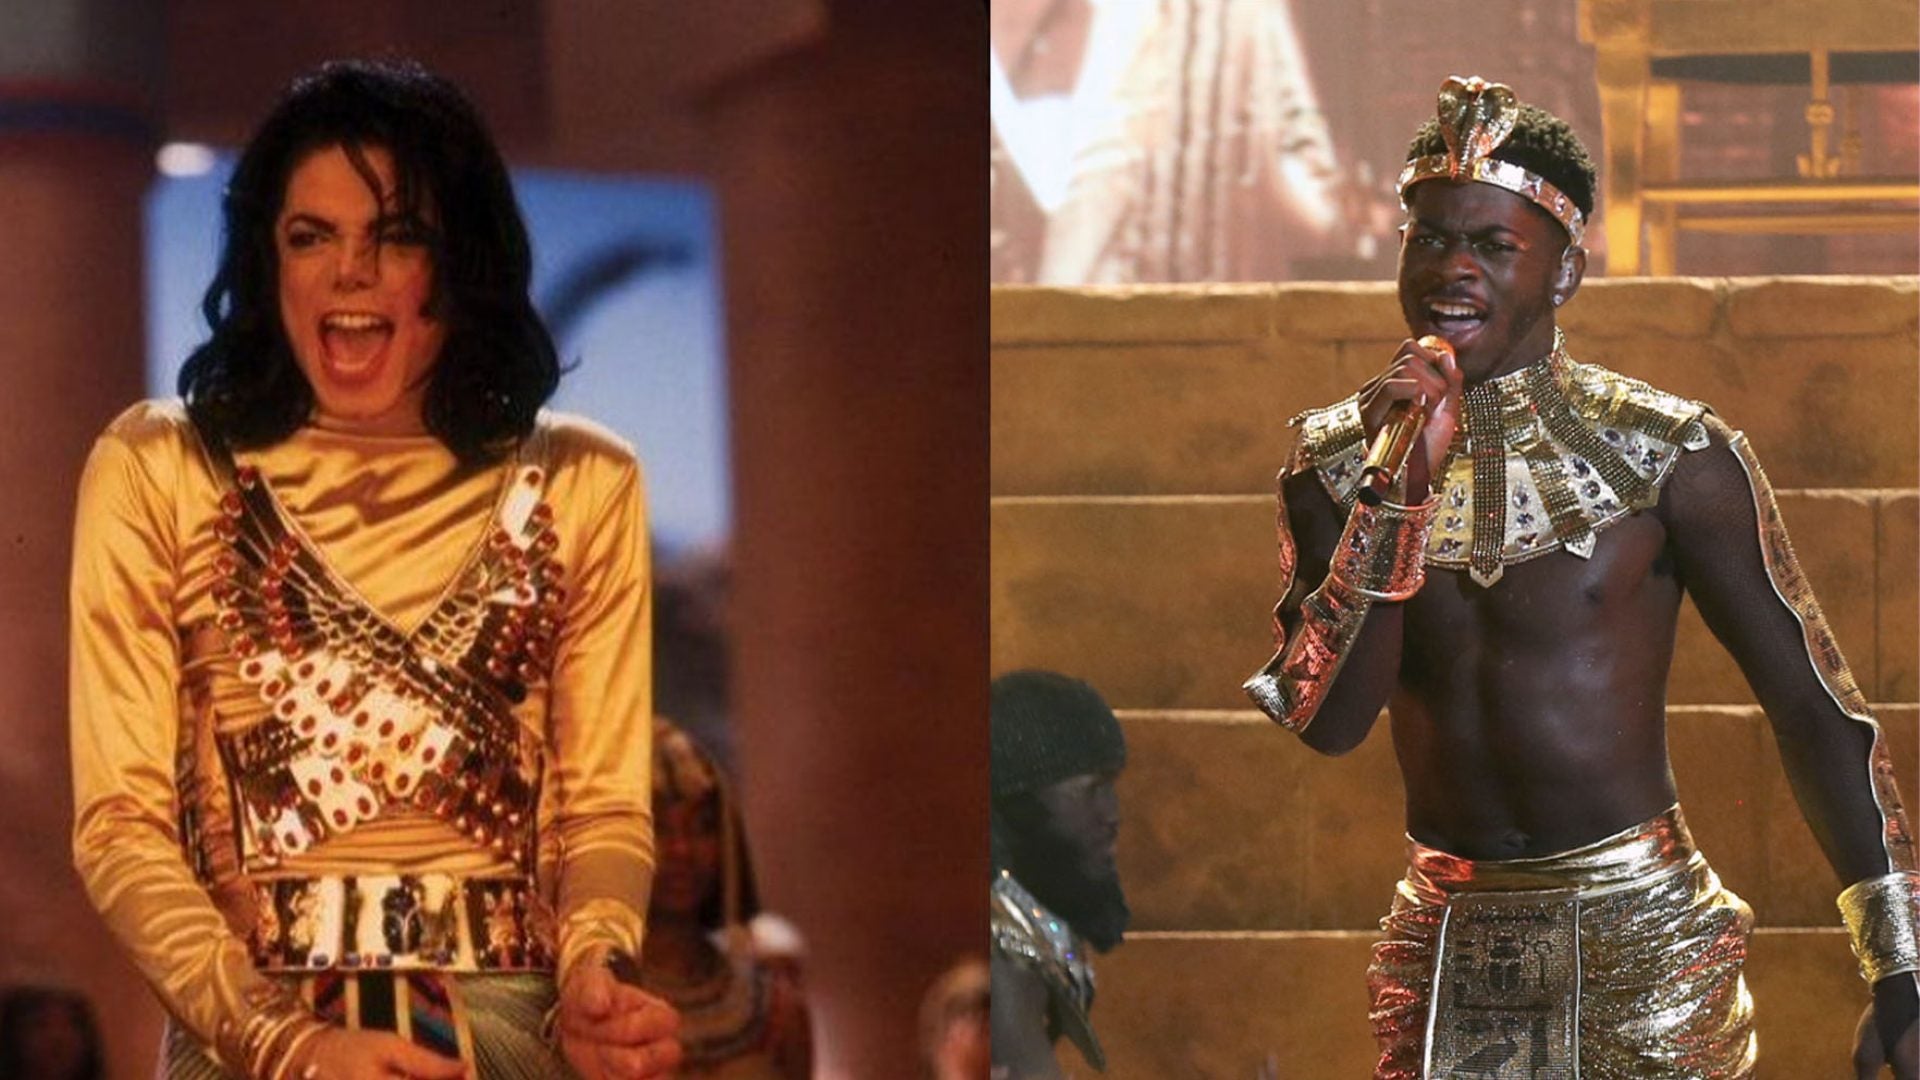 Did You Catch Lil Nas X's Tribute To Michael Jackson At The 2021 BET Awards?